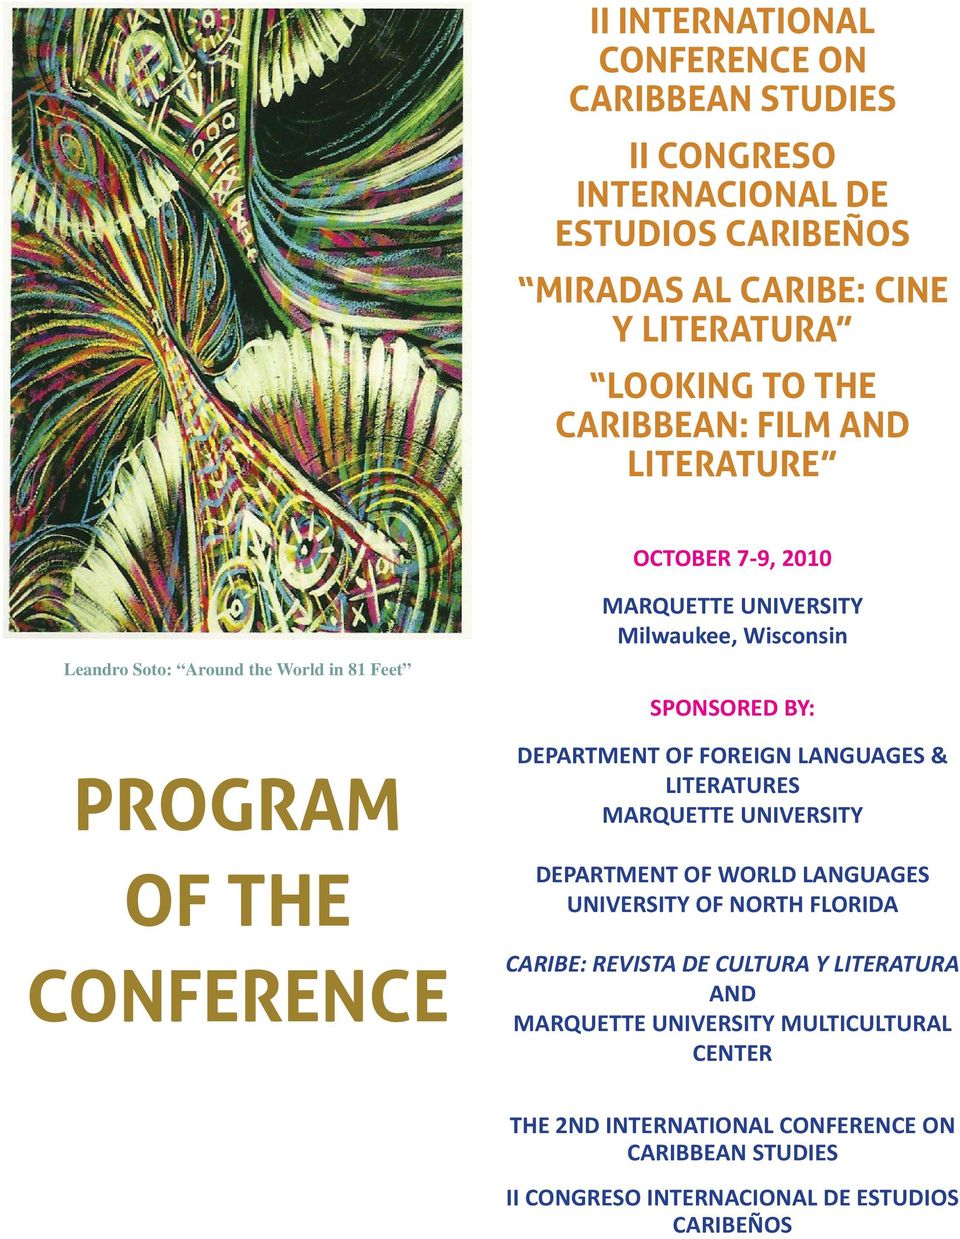 SPONSORED BY: DEPARTMENT OF FOREIGN LANGUAGES & LITERATURES MARQUETTE UNIVERSITY DEPARTMENT OF WORLD LANGUAGES UNIVERSITY OF NORTH FLORIDA CARIBE: REVISTA DE